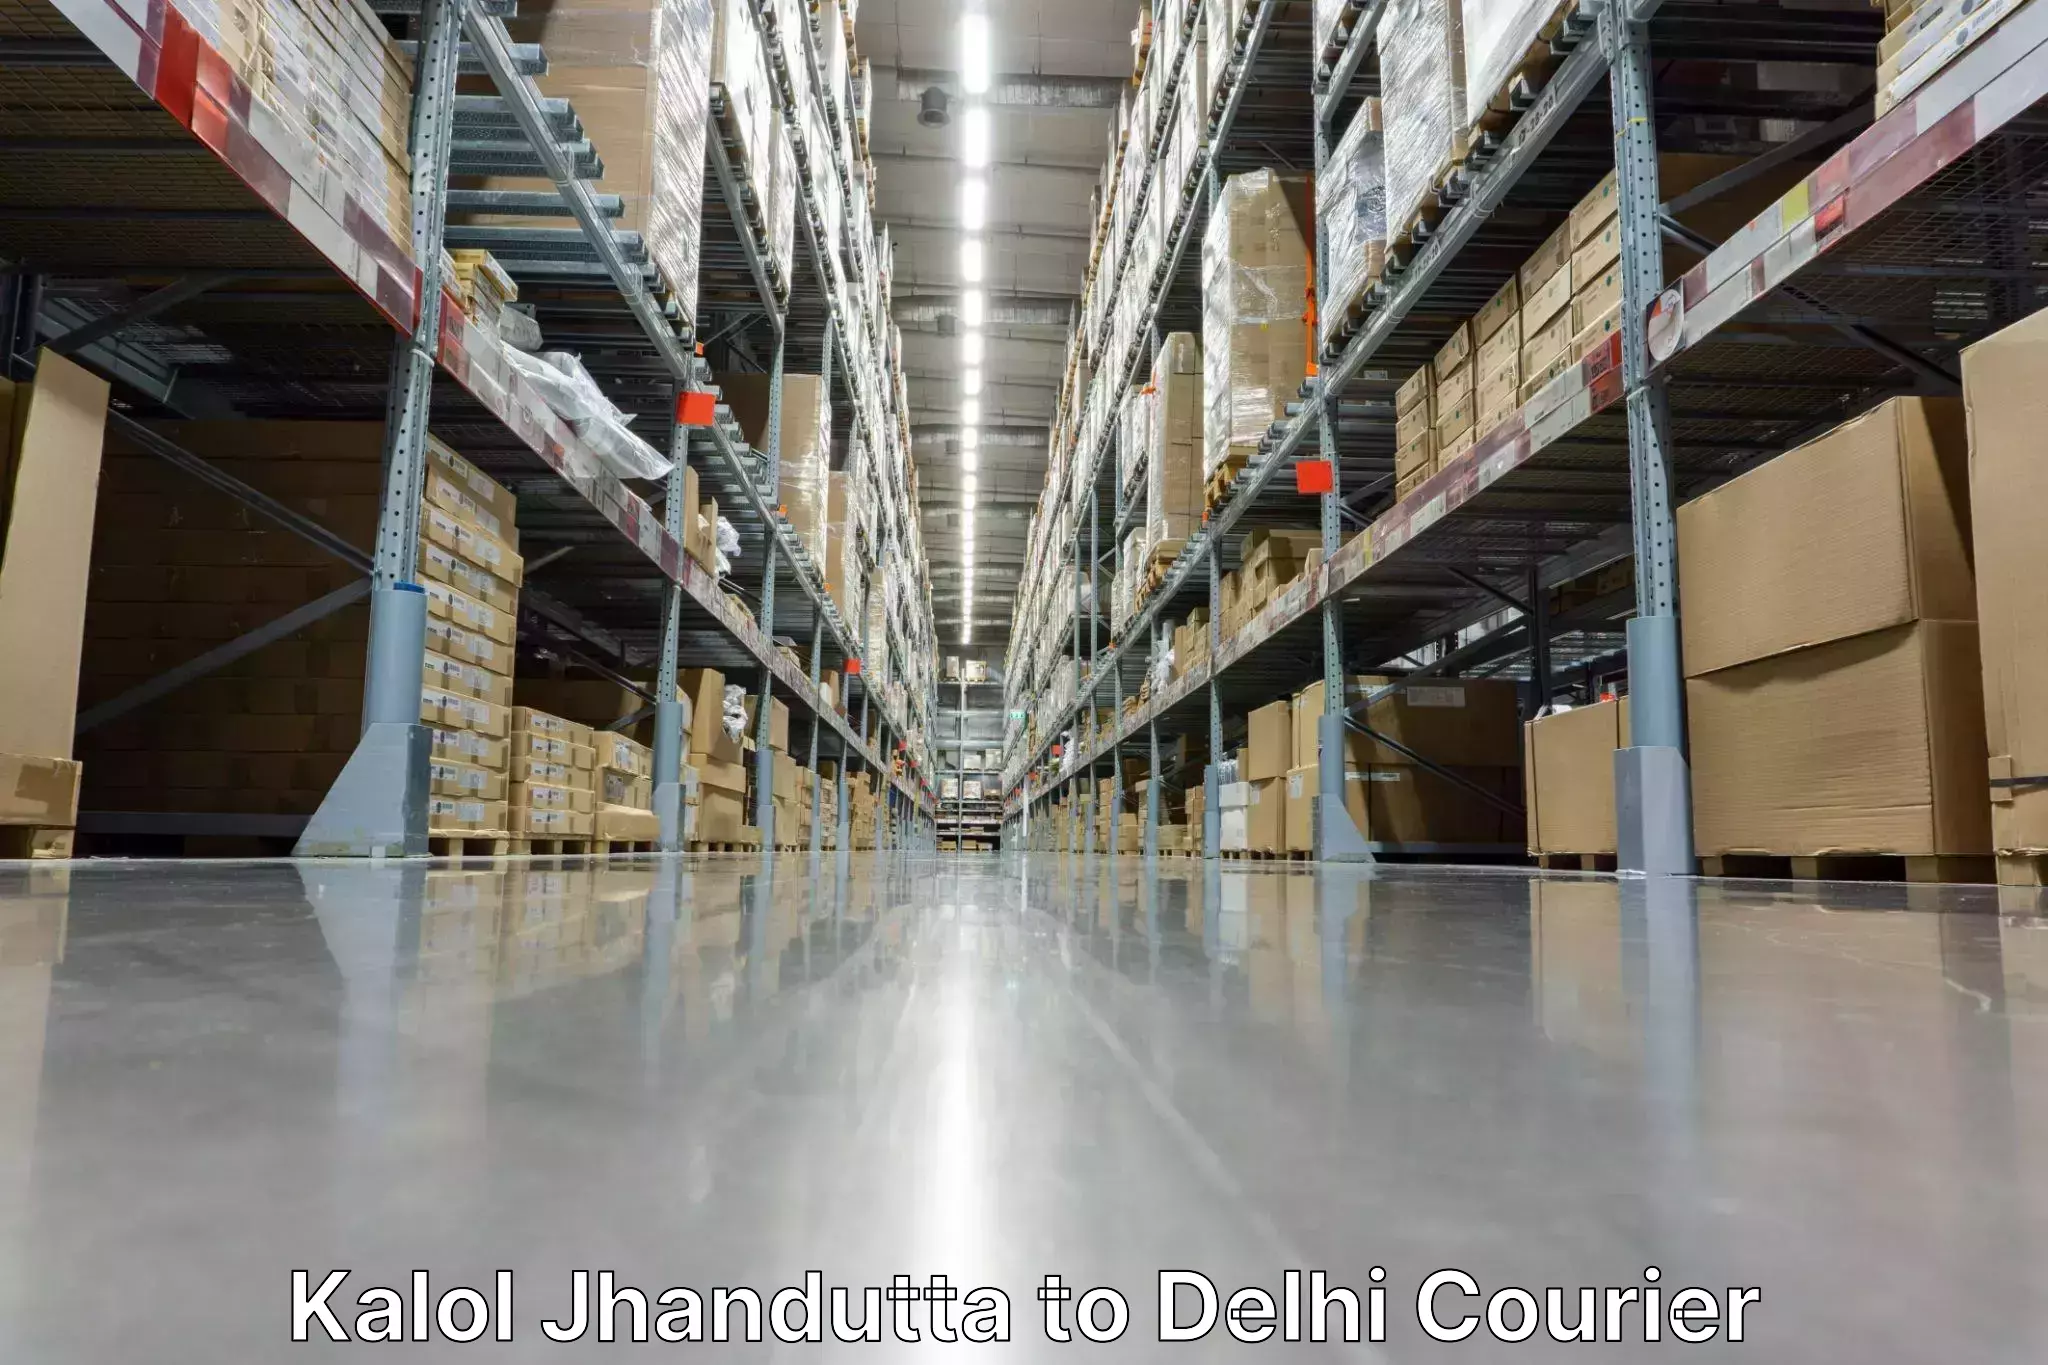 24-hour delivery options in Kalol Jhandutta to Lodhi Road